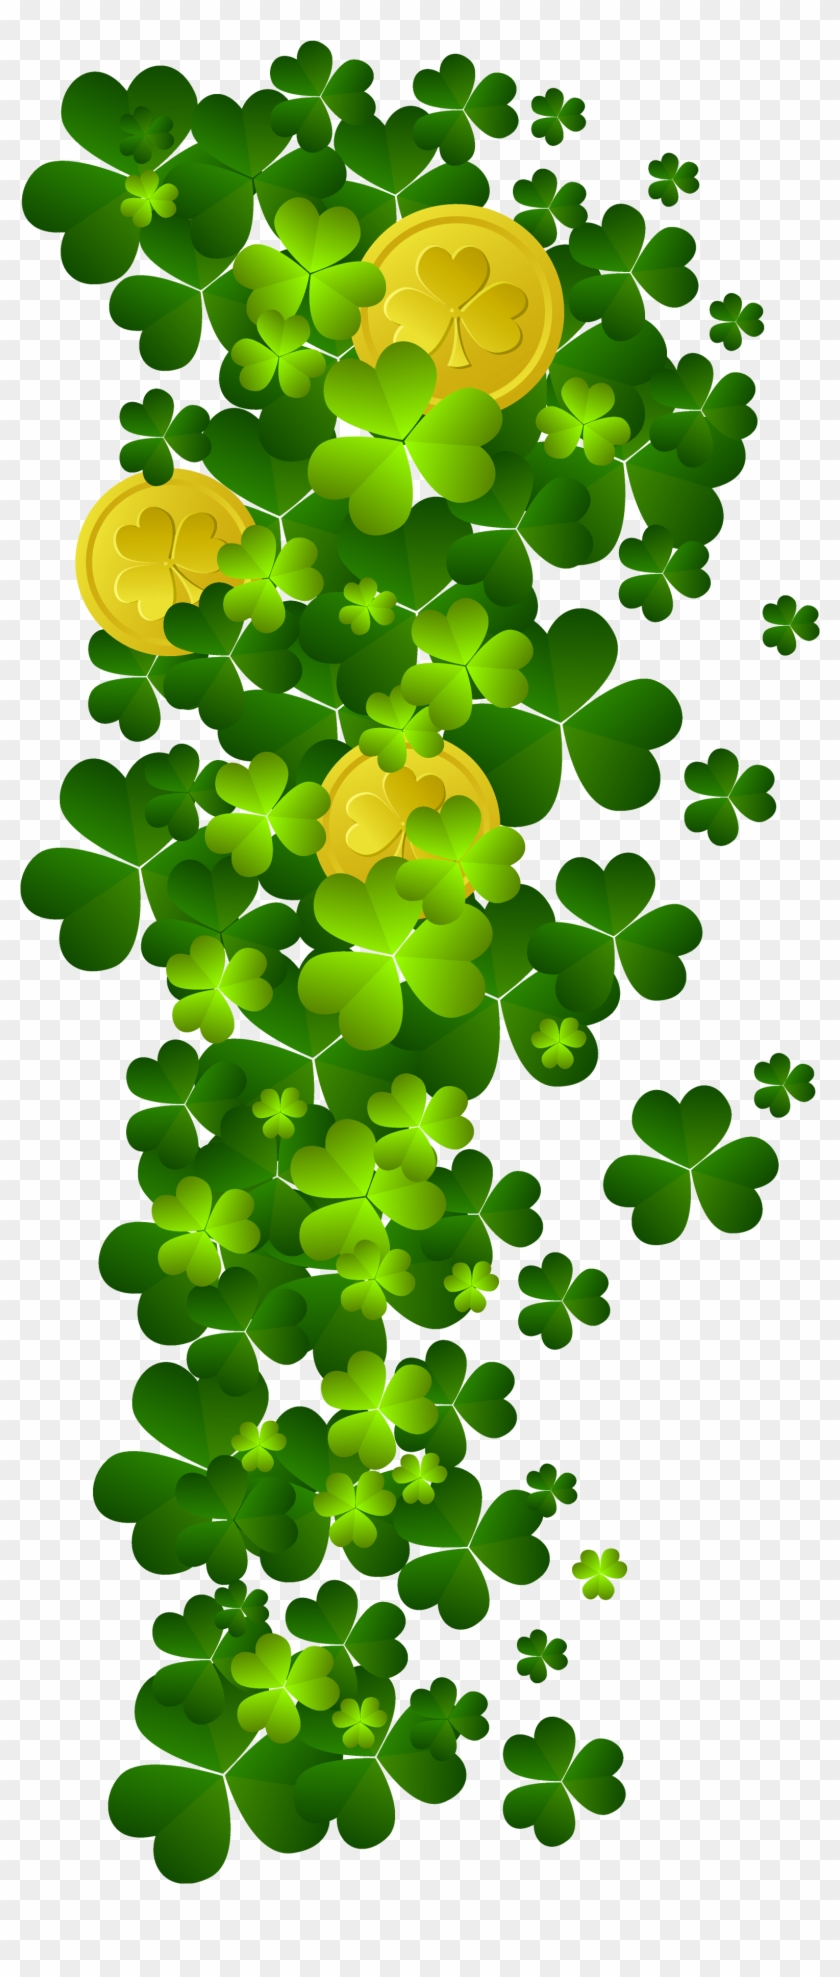 St Patricks Shamrock St Patricks Shamrock 27 With Coins - Gold Coins St Patricks Day Png #893915